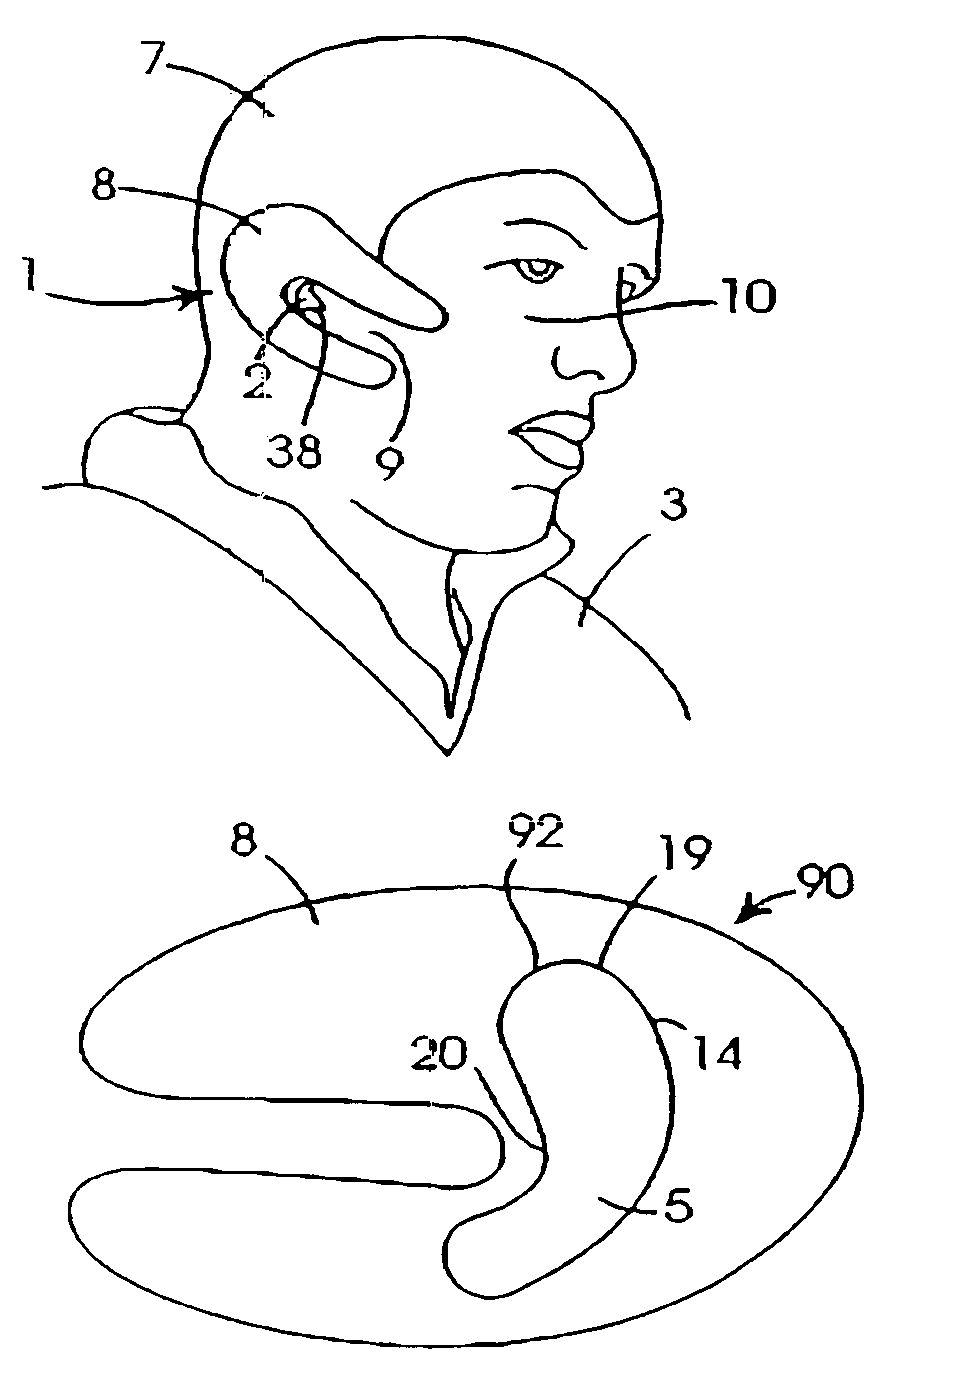 Device and method for protecting an ear of a subject from auricular haematoma